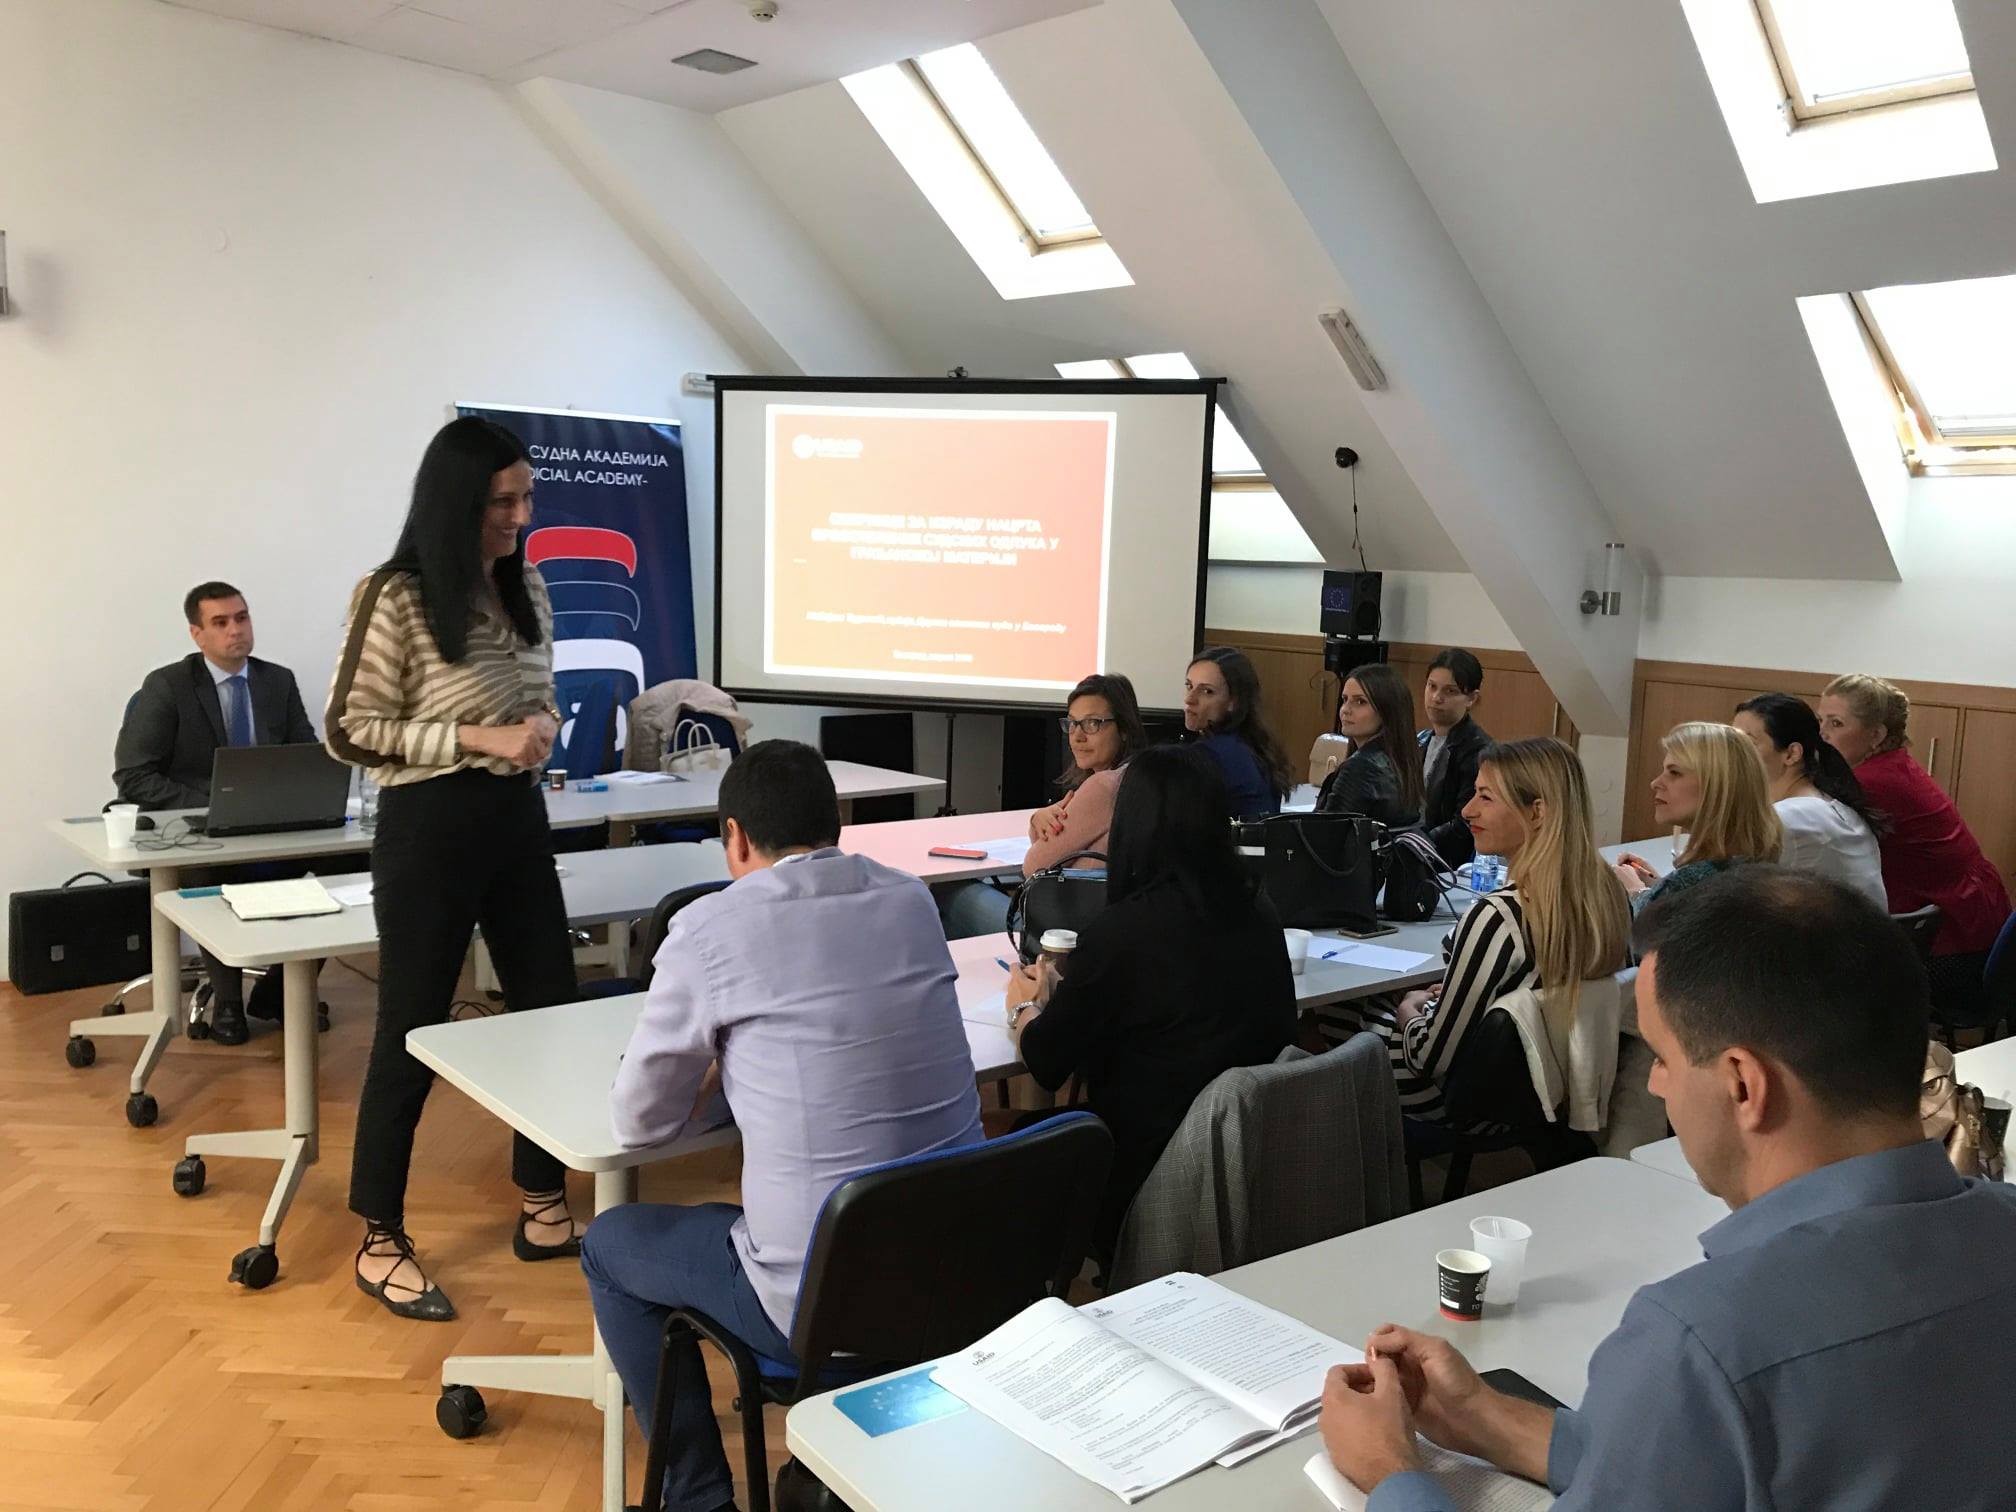 Building Capacities of Judicial Assistants in Serbia to Better Support Judges